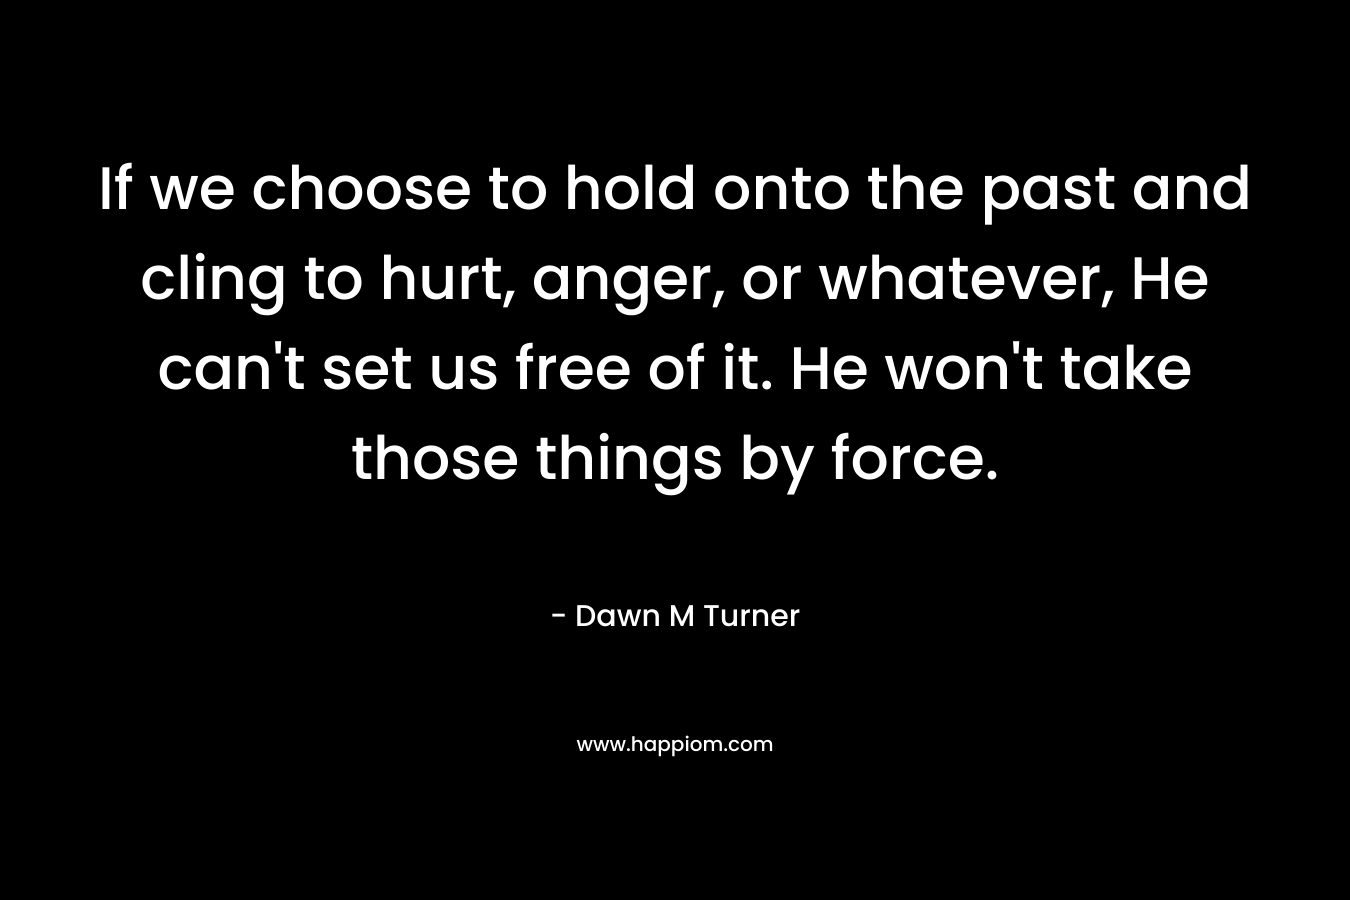 If we choose to hold onto the past and cling to hurt, anger, or whatever, He can’t set us free of it. He won’t take those things by force. – Dawn M Turner